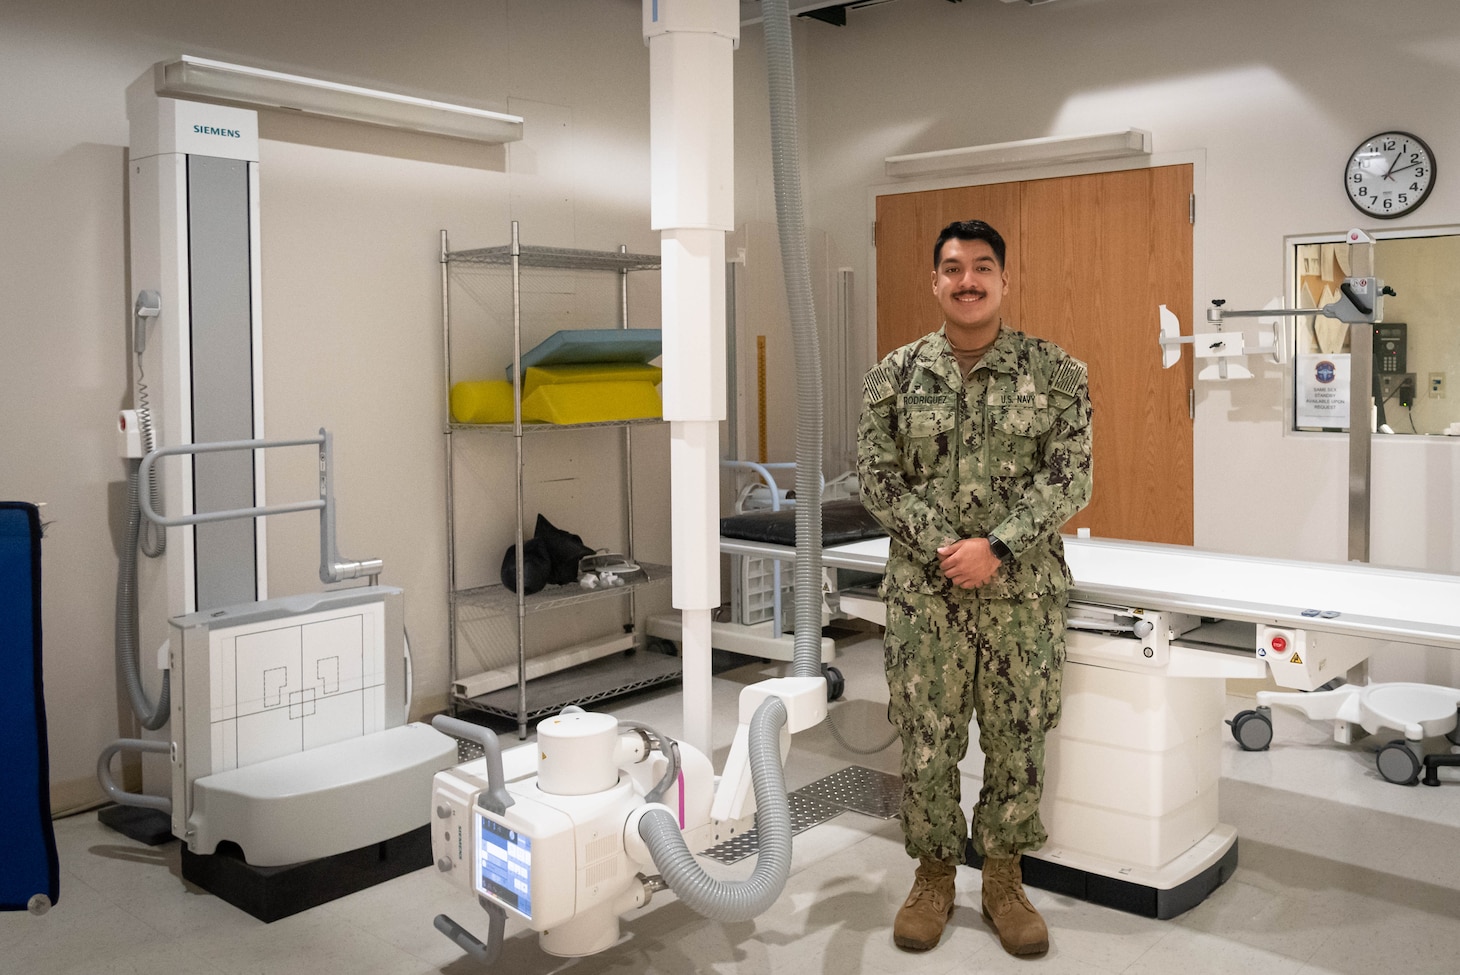 Hospitalman Miguel Rodriguez serves on the Radiology team aboard Naval Health Clinic Cherry Point. The Brownsville, Texas native recently passed the challenging America Registry of Radiologic Technologists Registry exam, earning himself the formal designation as a Radiologic Technologist.